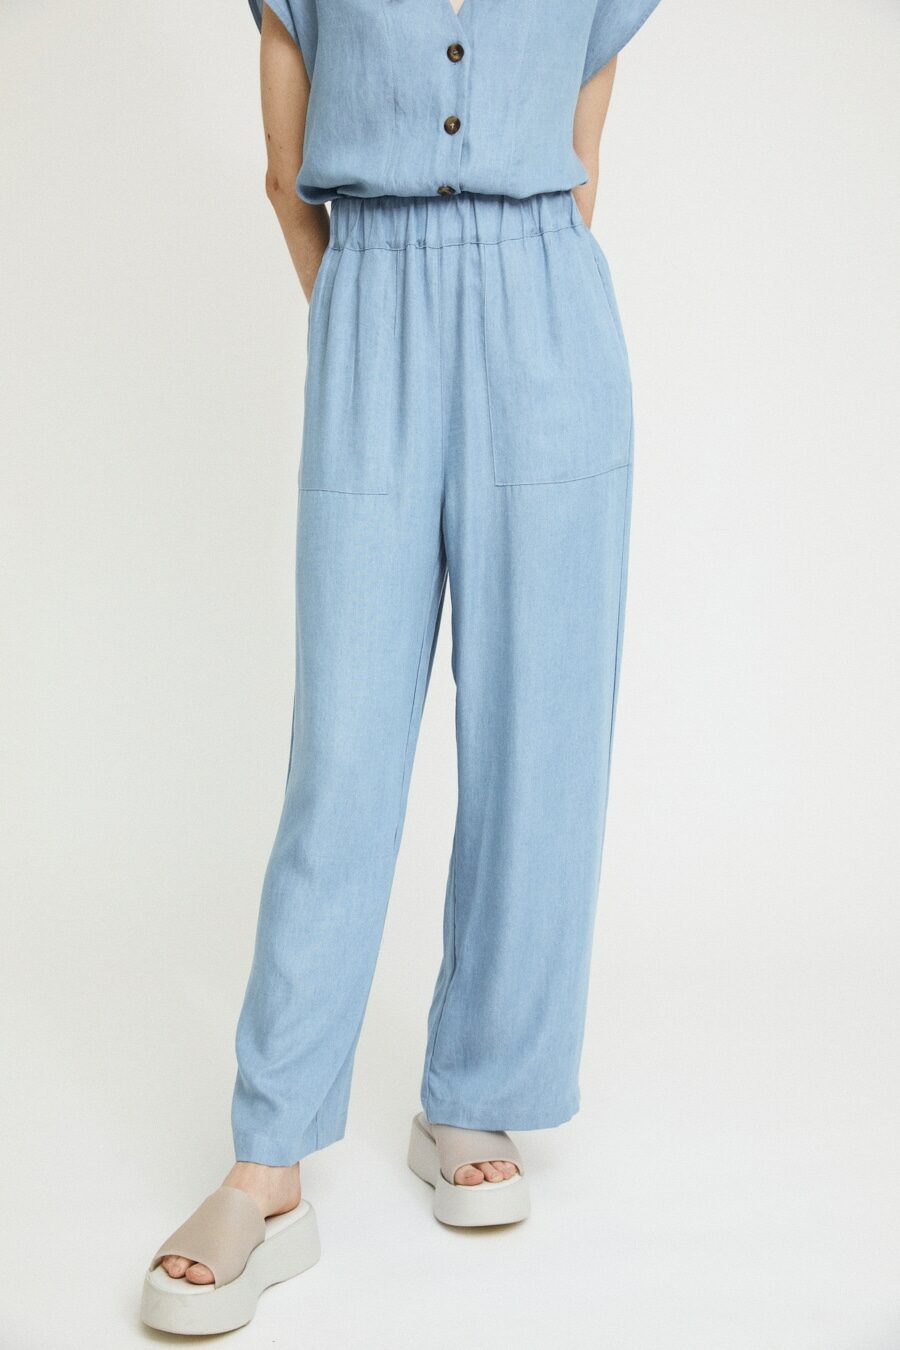 Shop sustainable pants at Thread Spun by Rita Row.